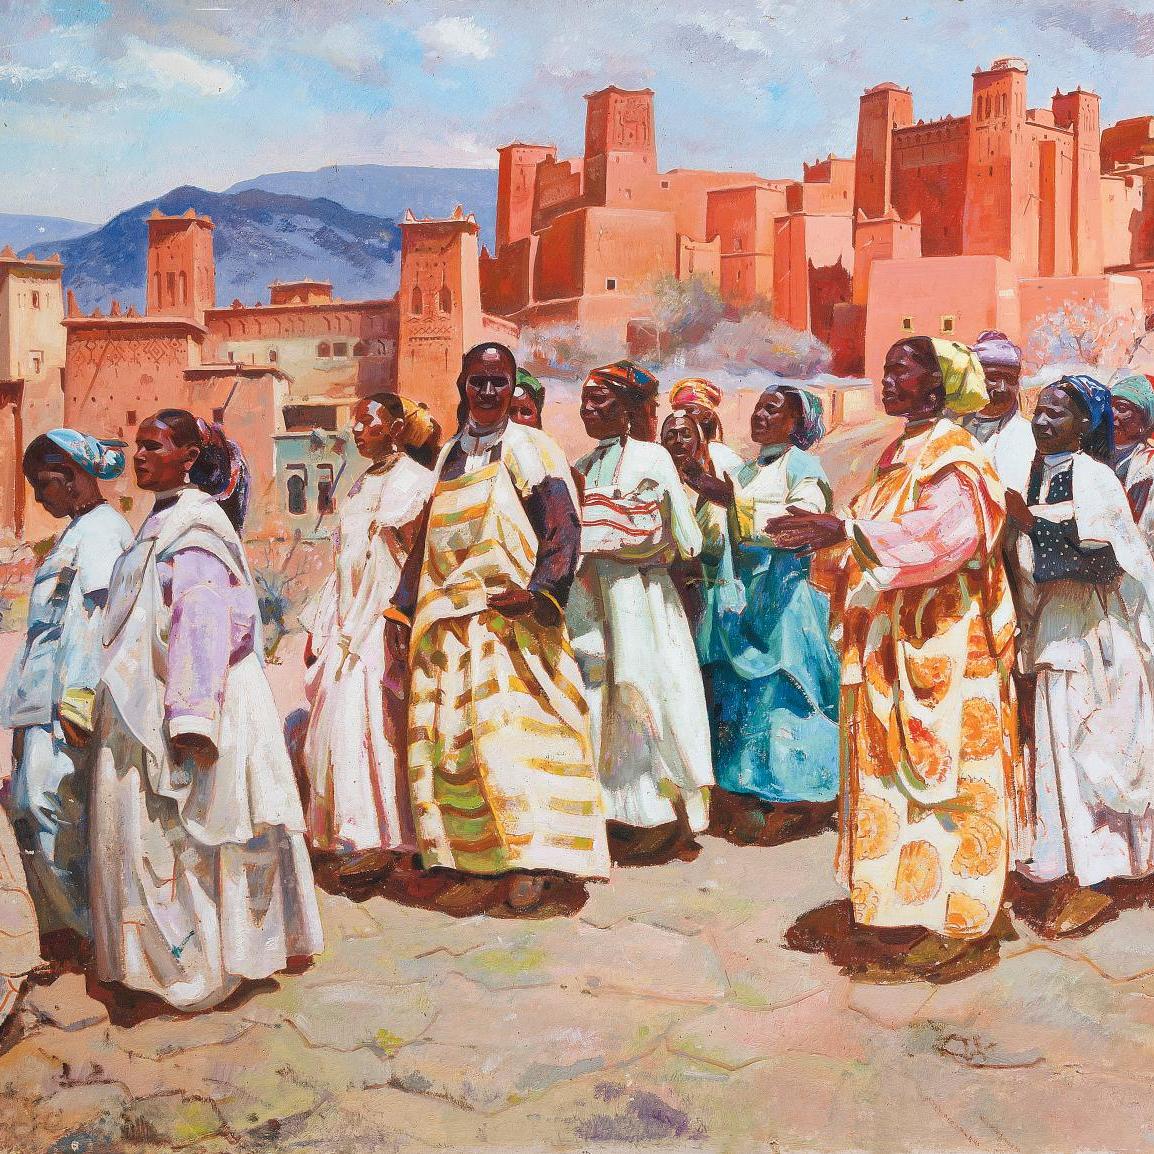 Jacques Majorelle: Spring in the Atlas Mountains - Lots sold